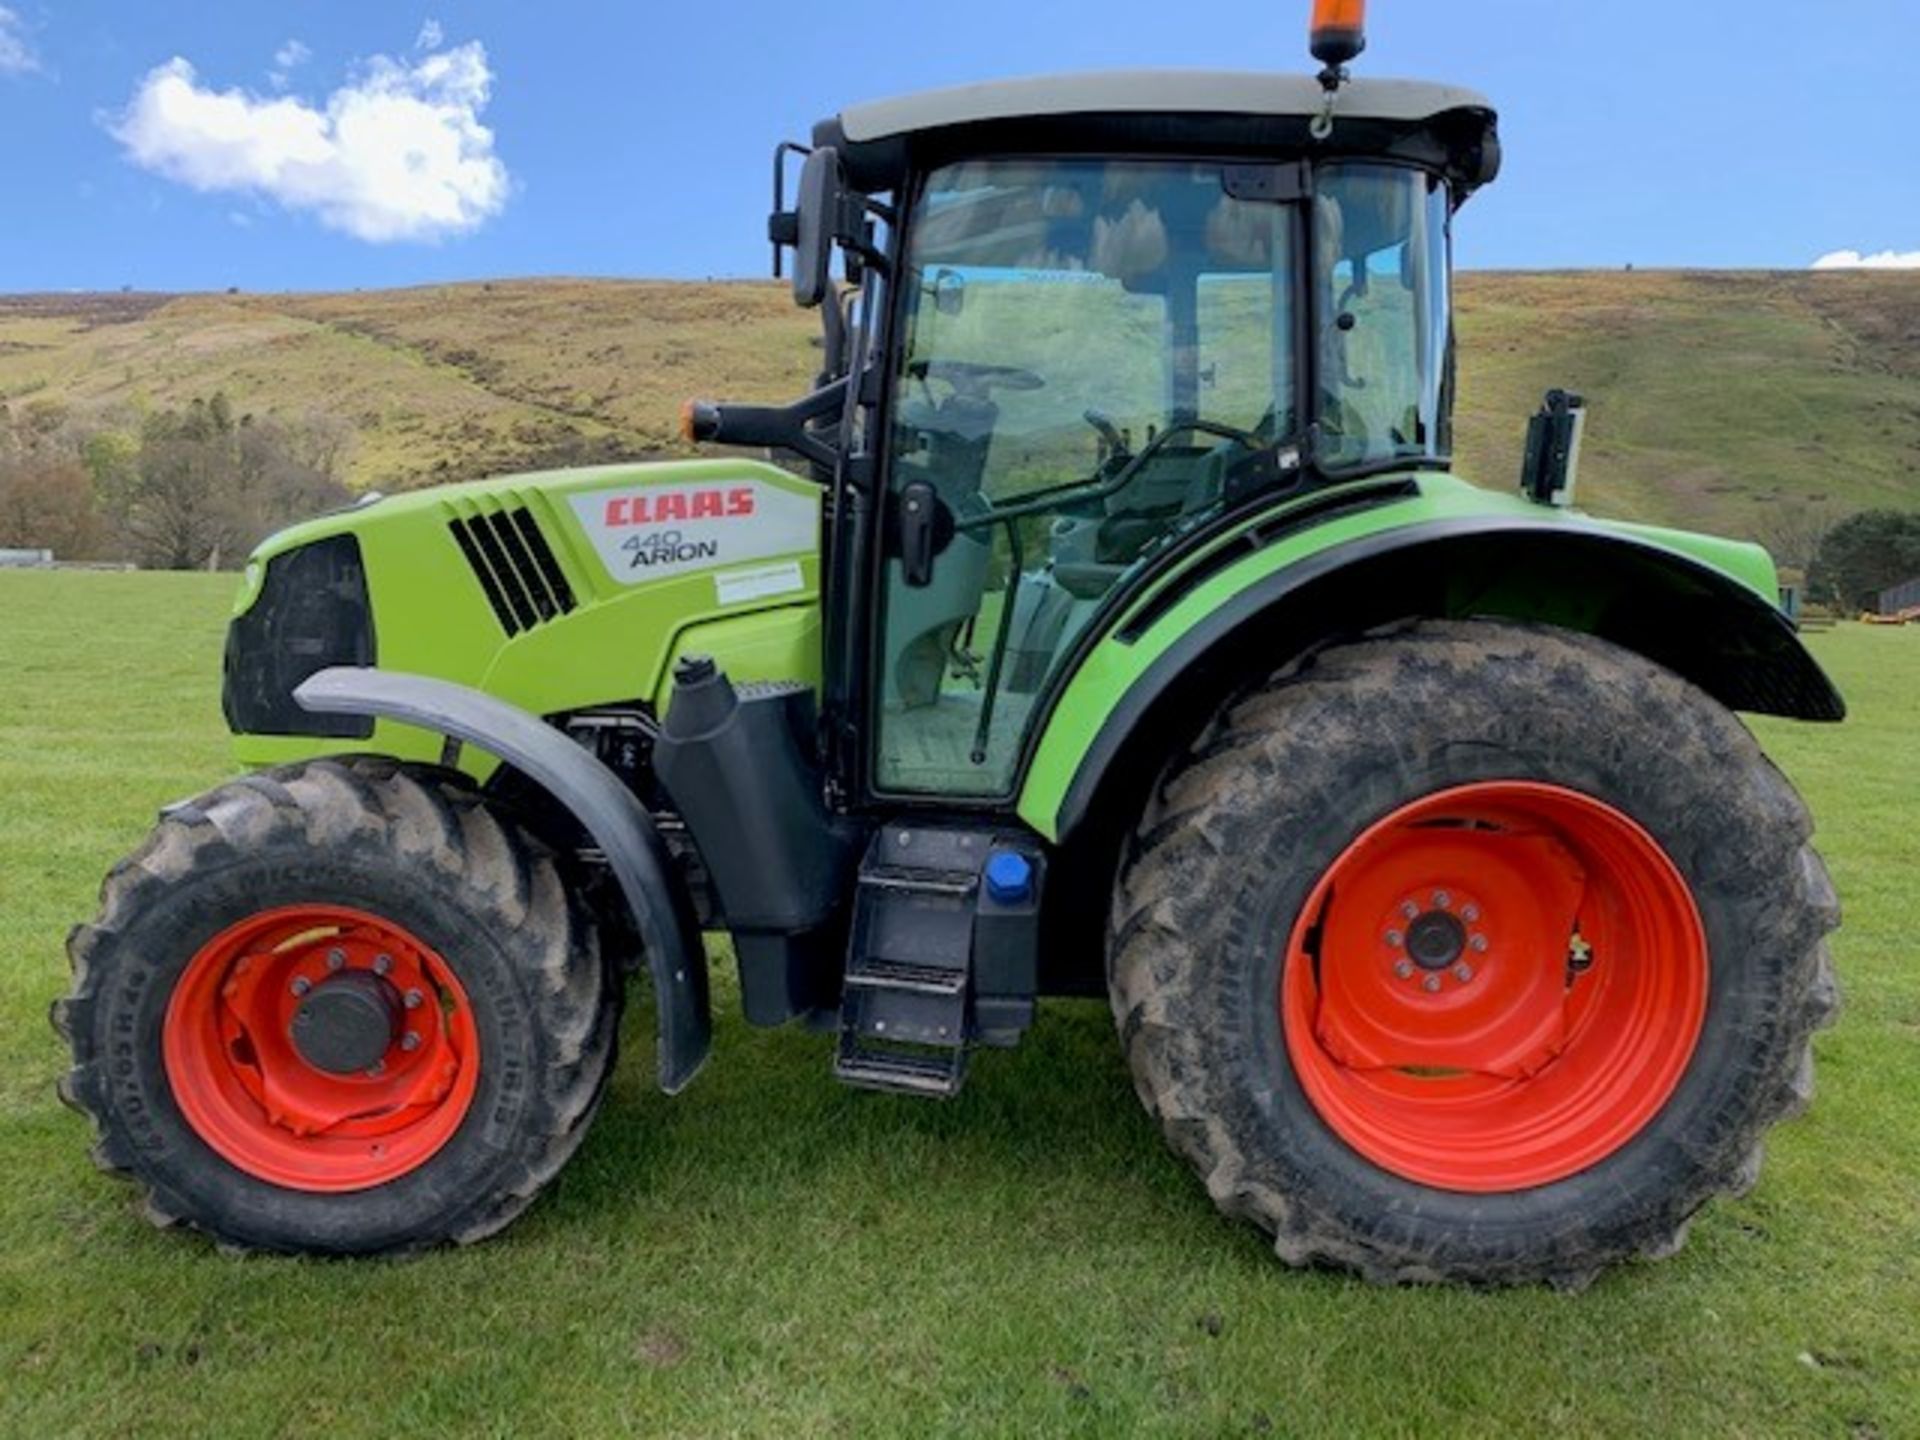 CLAAS ARION 440 4WD TRACTOR. REG.NO. DX17 CYV FIRST REG 1/4/17 125HP PANORAMIC ROOF APPROX 1800 HRS - Image 4 of 7